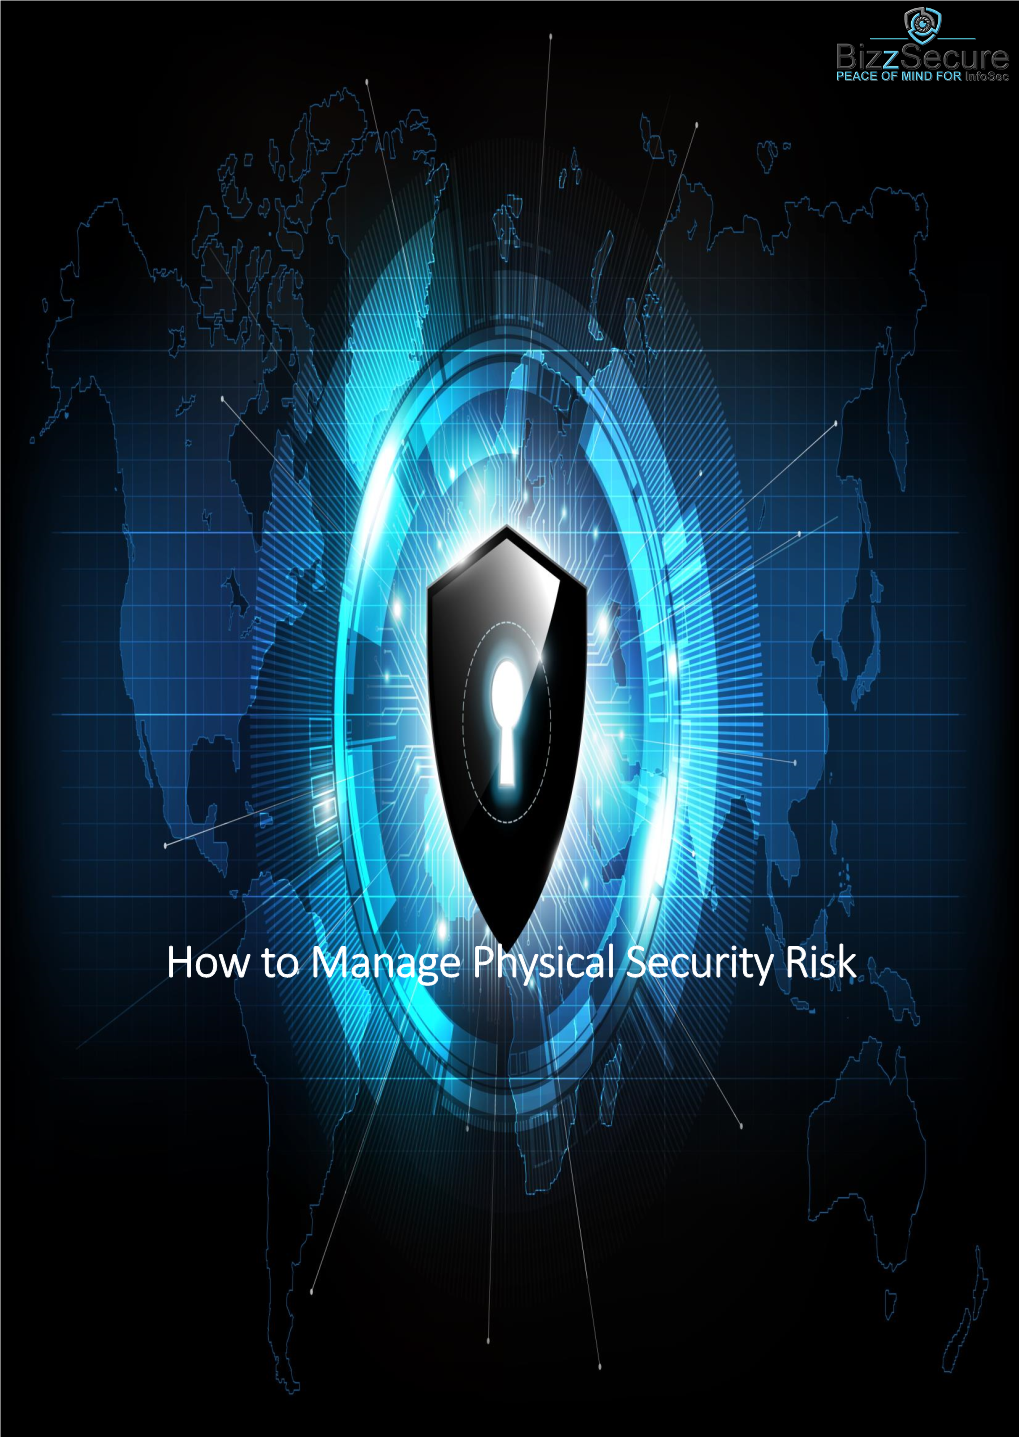 How to Manage Physical Security Risk